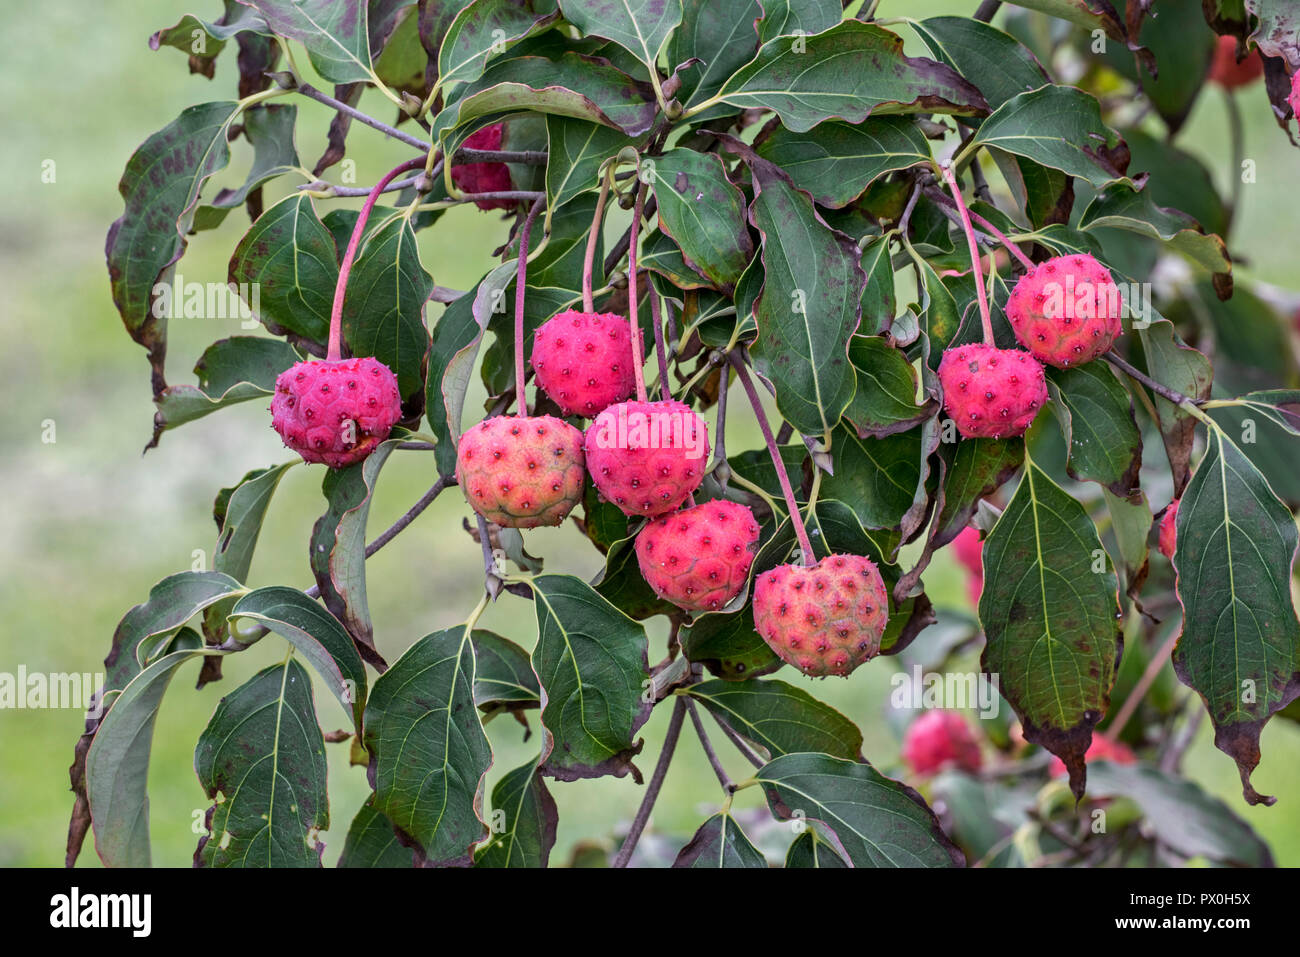 Chinese dogwood (Cornus kousa chinensis) close up of foliage and pink fruit / berries in autumn Stock Photo